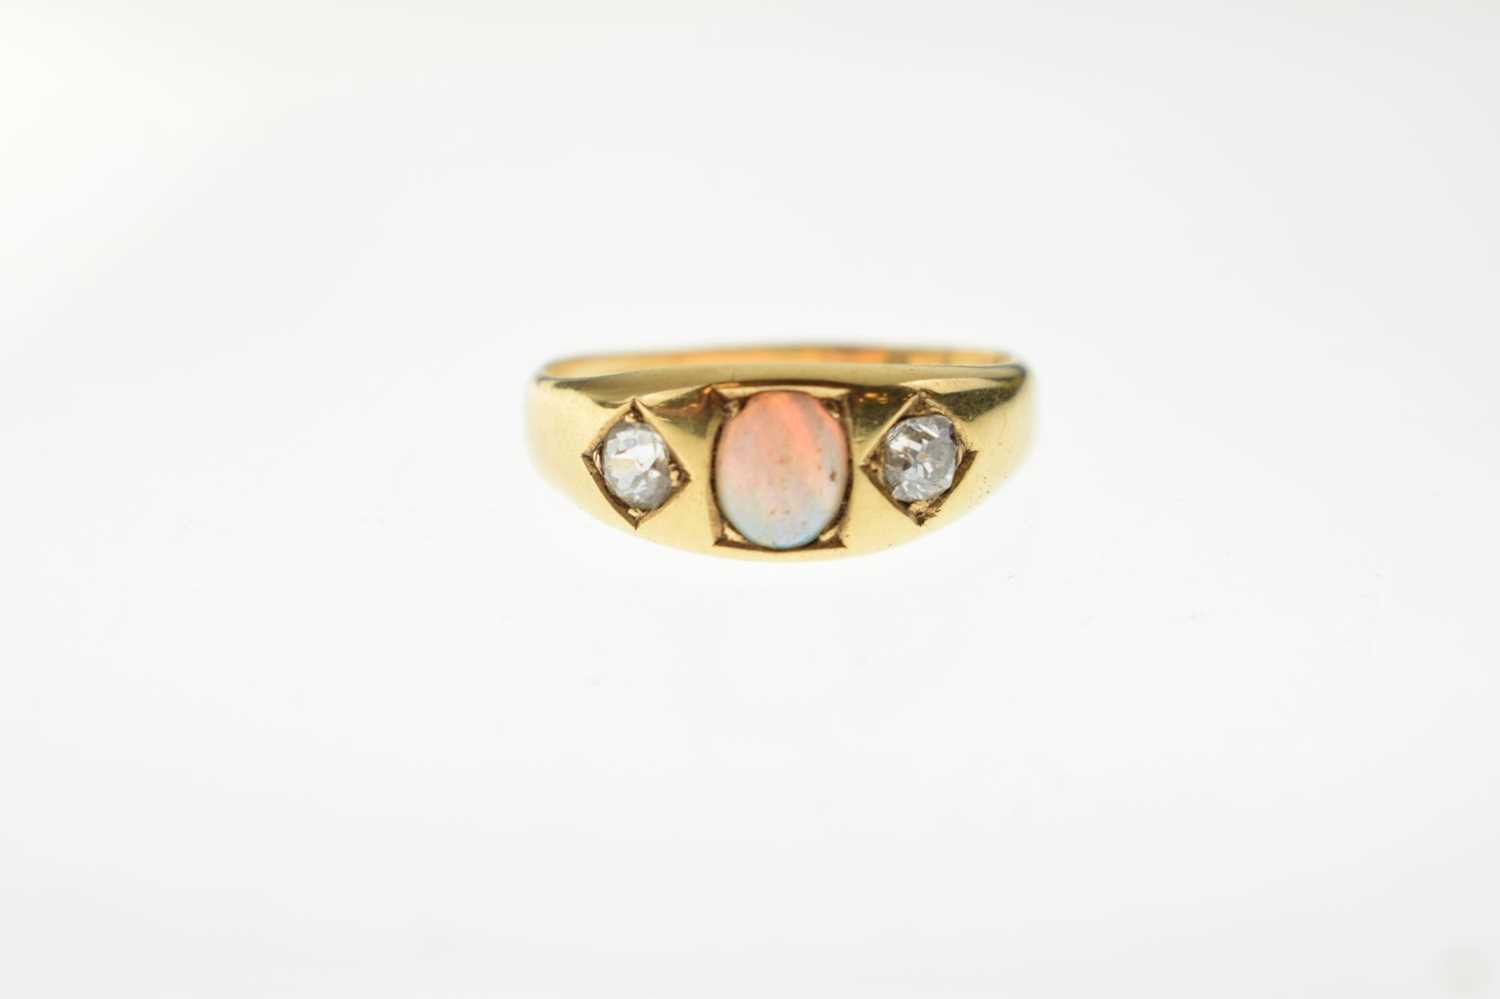 Late Victorian/Edwardian opal and diamond ring - Image 2 of 7